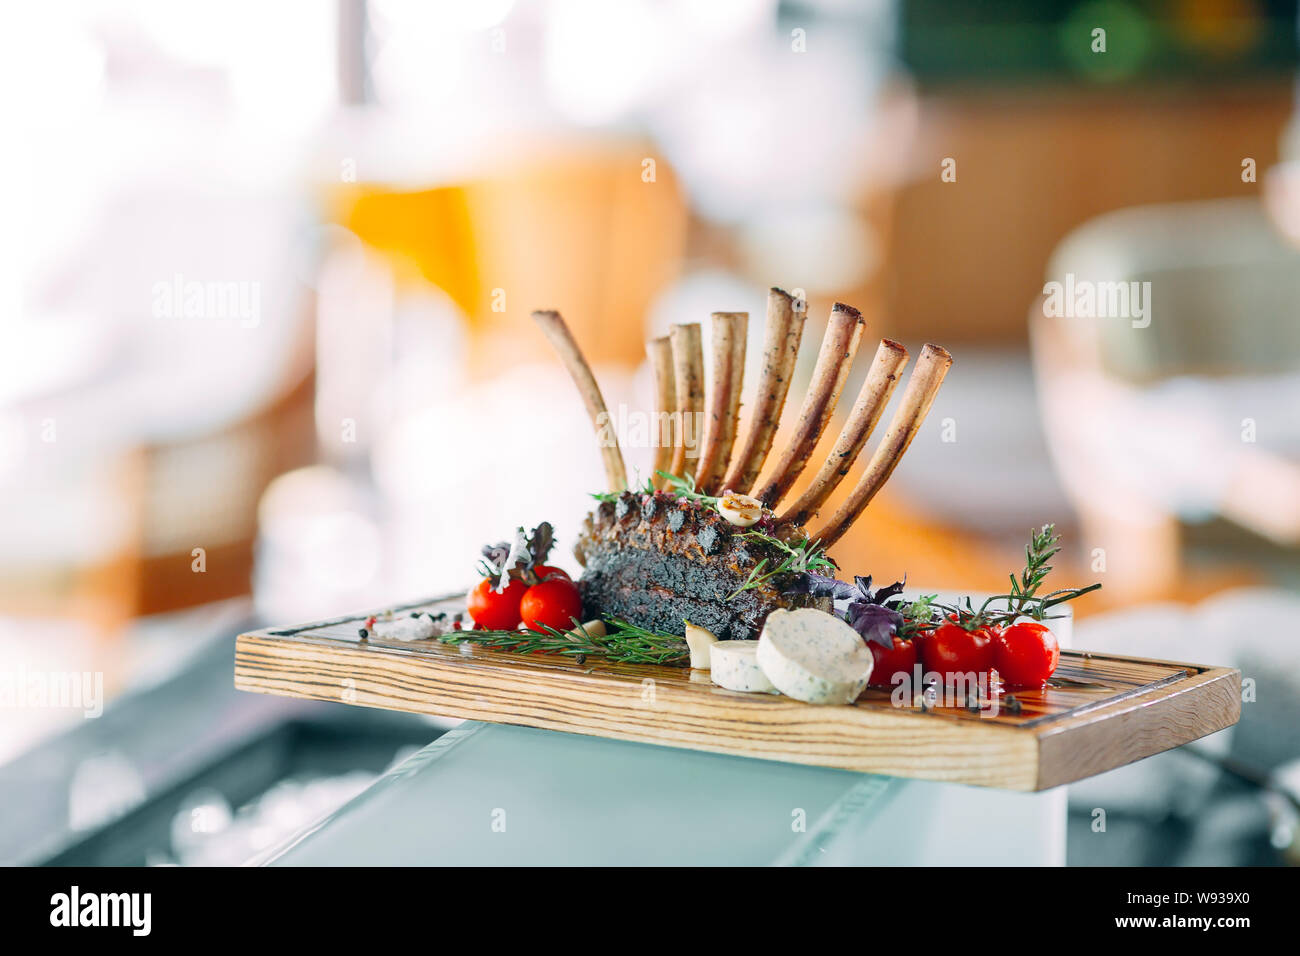 Dish Rack of Lamb with tomatoes on a wooden tray. Stock Photo